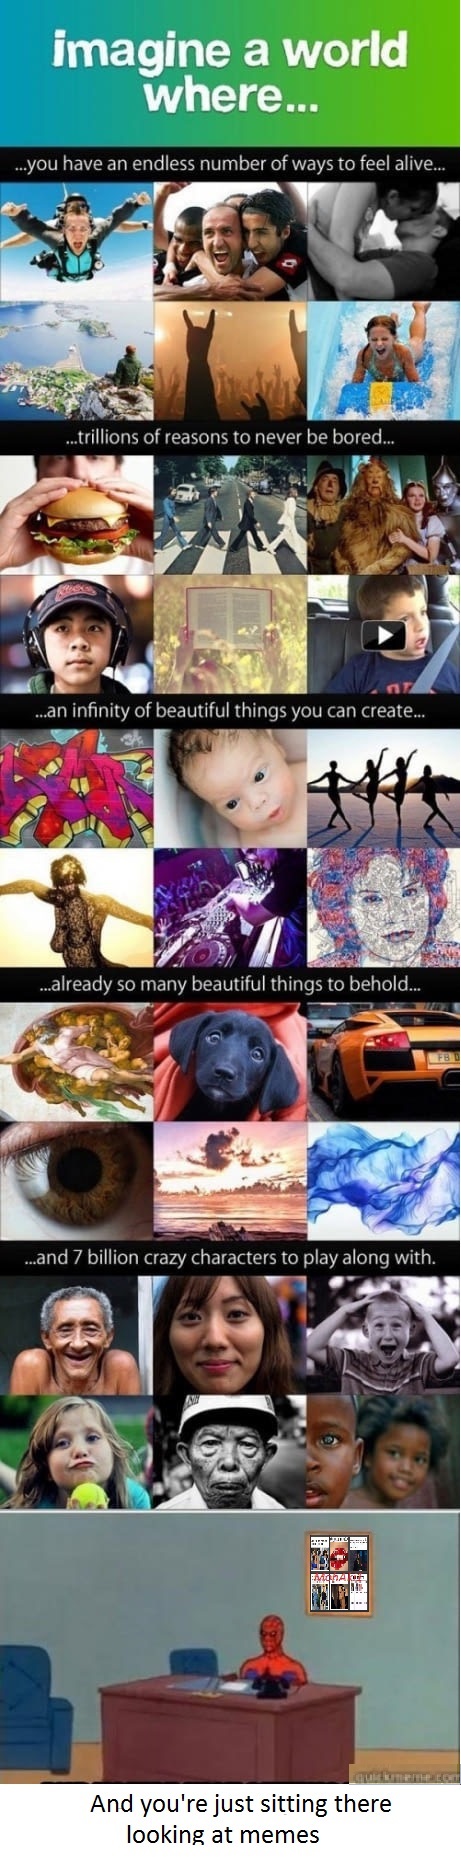 meme - imagine a world where nofap - imagine a world where... ...you have an endless number of ways to feel alive... ...trillions of reasons to never be bored... ...an infinity of beautiful things you can create... ...already so many beautiful things to b